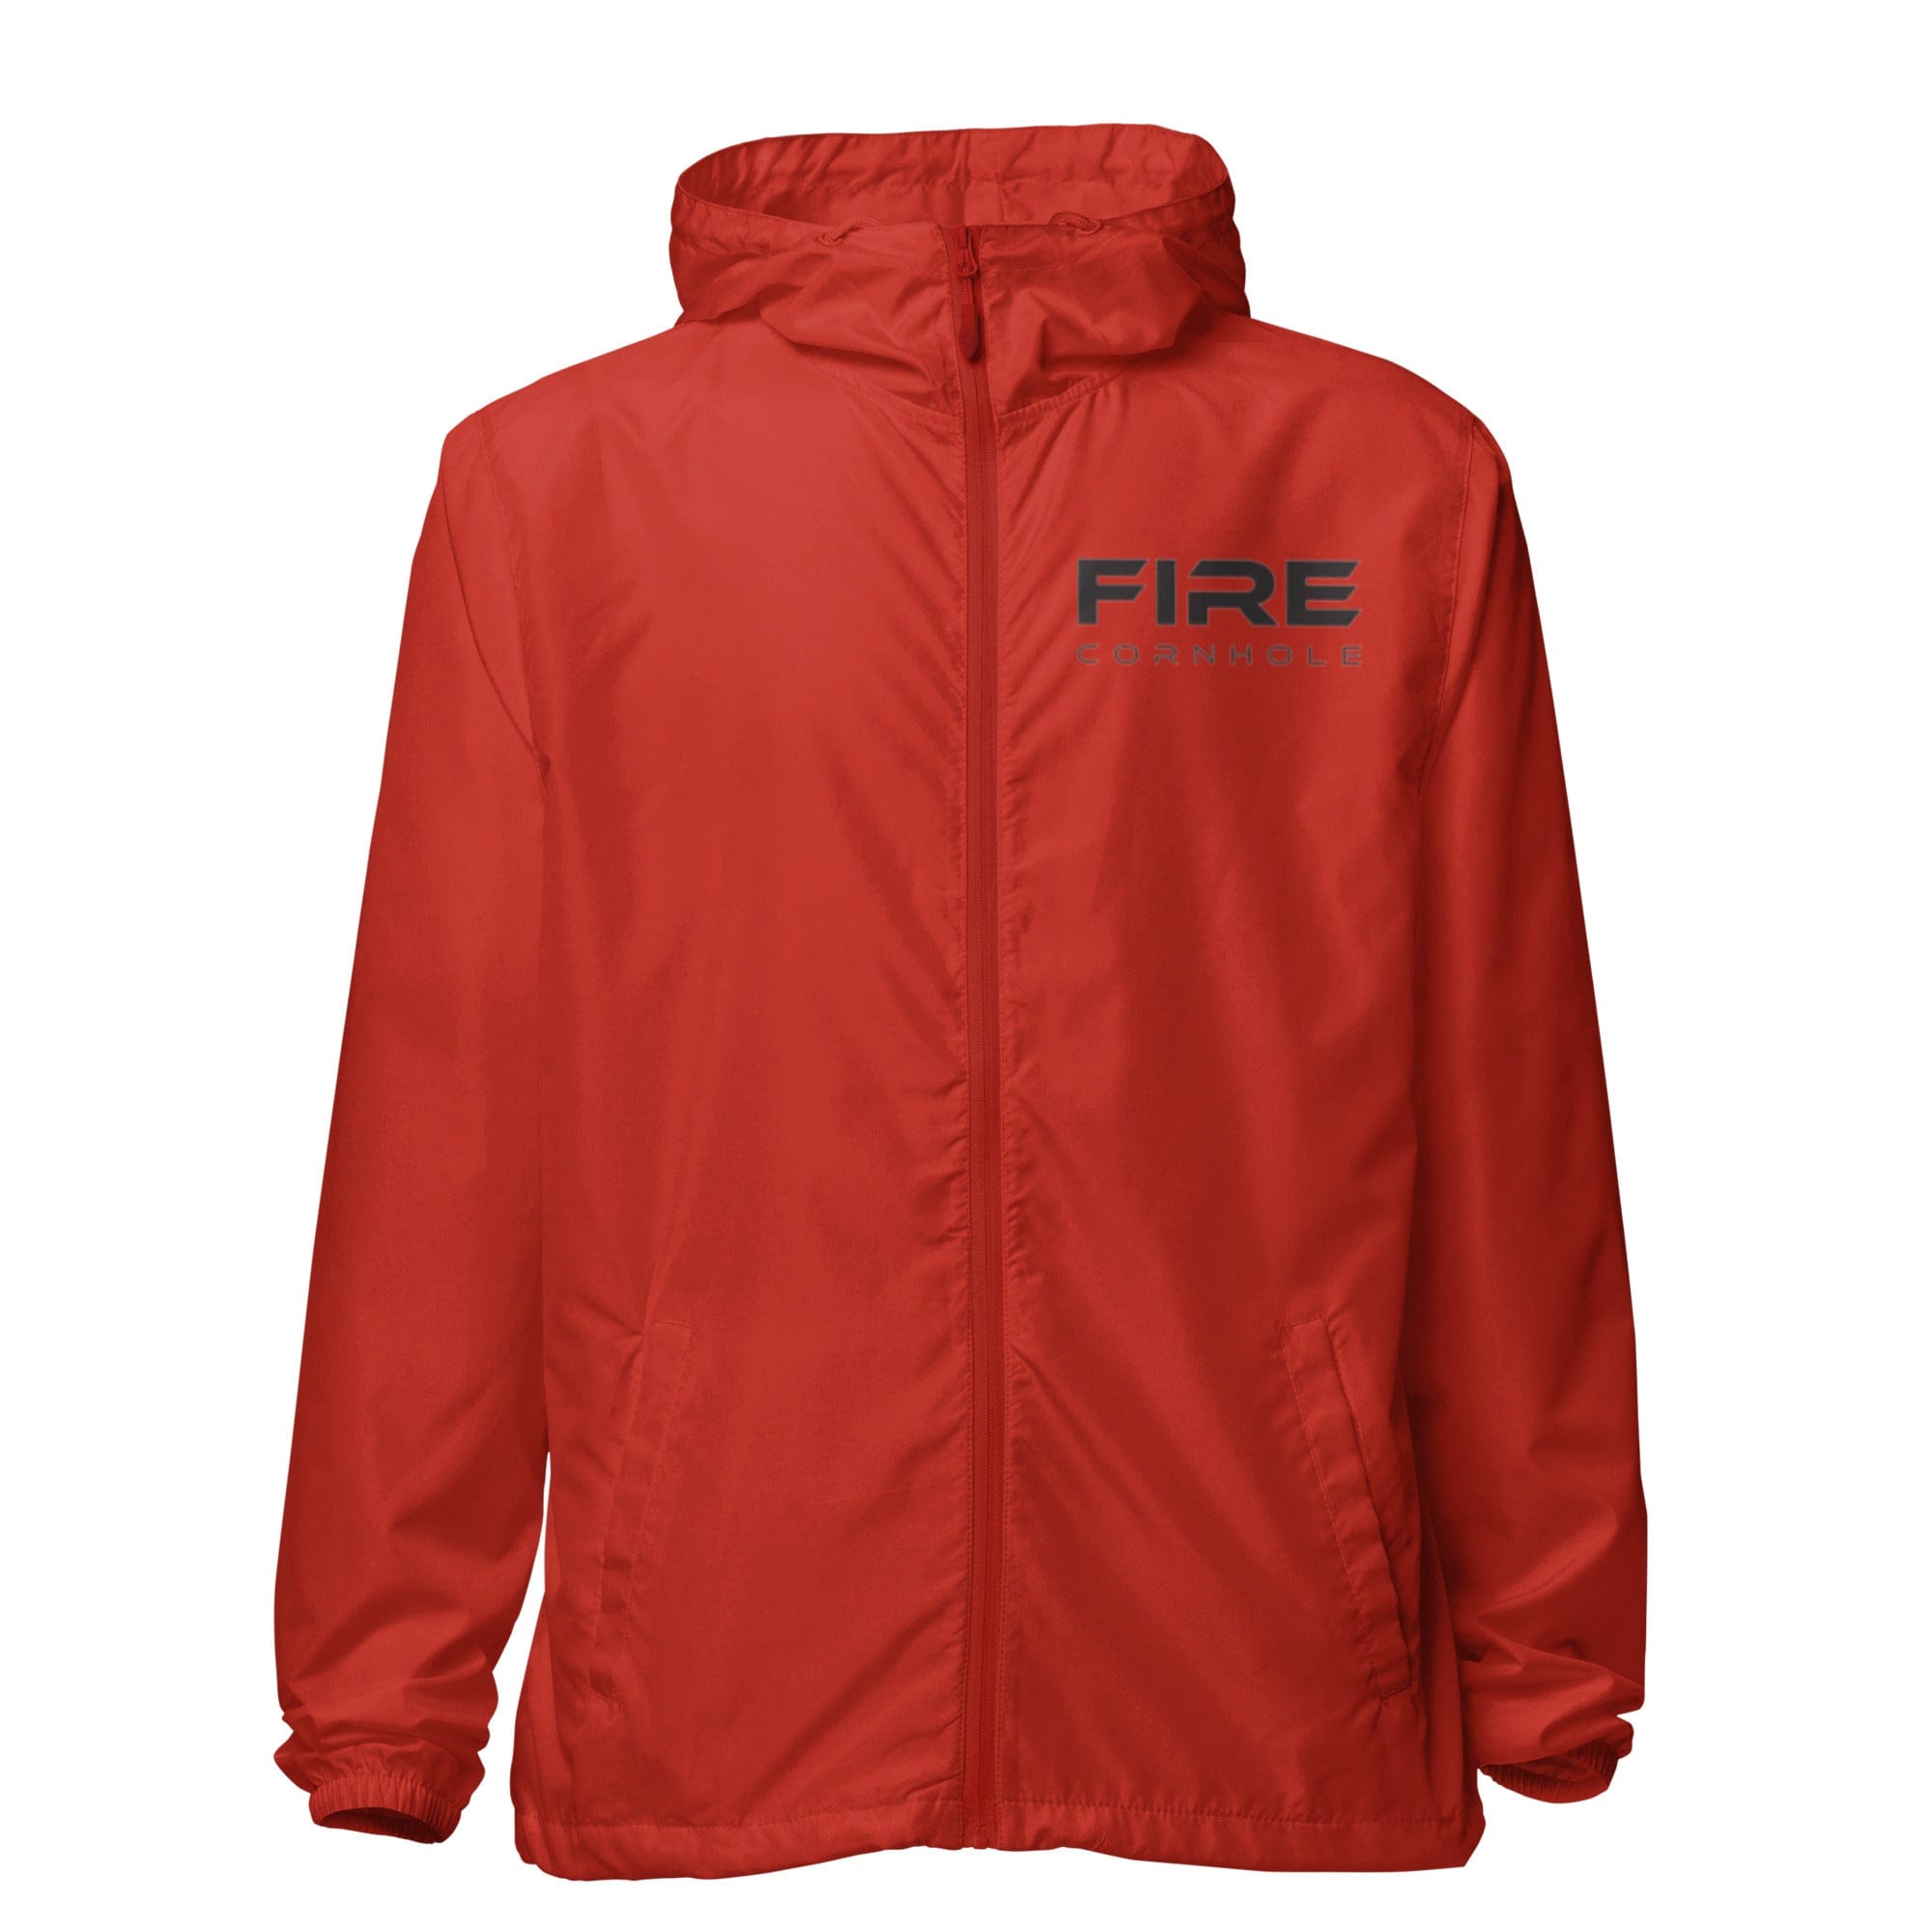 Front view of red unisex zip-up windbreaker with Fire Cornhole logo in black